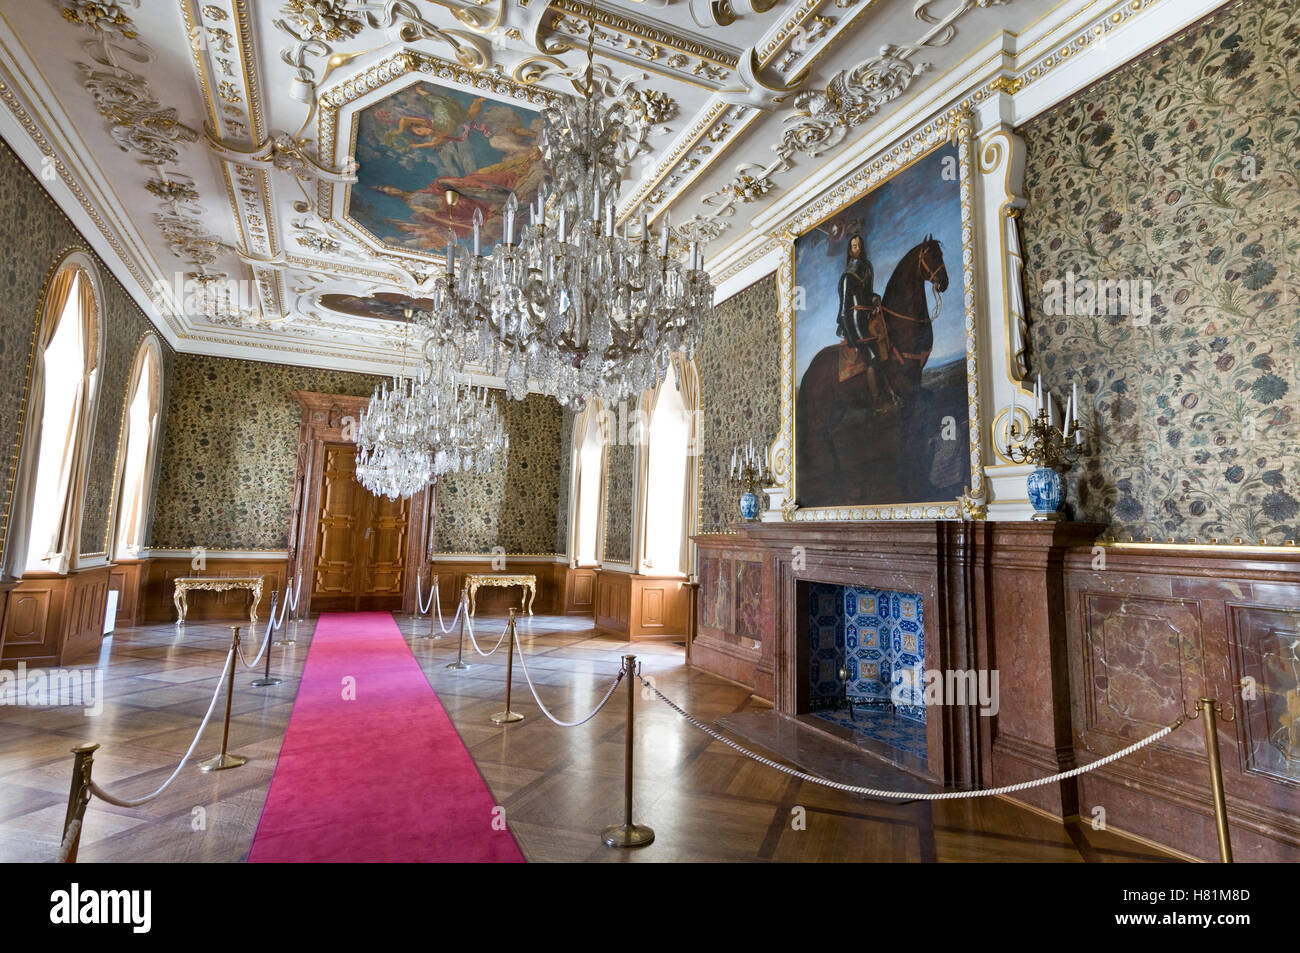 The Leather Hall because of its leather wall coverings was originally called the Knights’ Hall is at Wallenstein Palace, now the Stock Photo